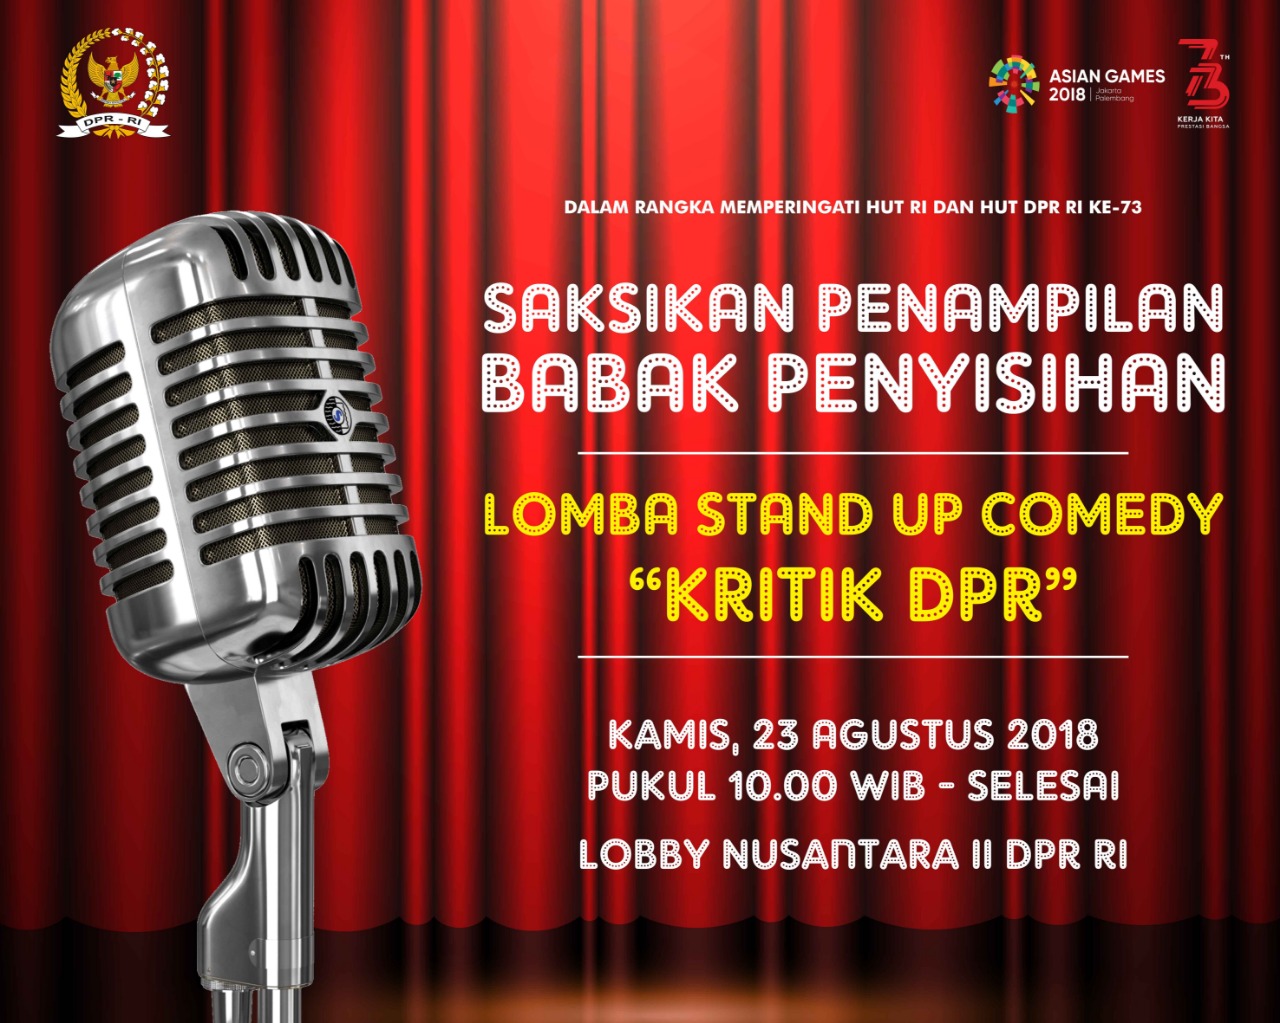 Lomba Stand Up Comedy Kritik DPR